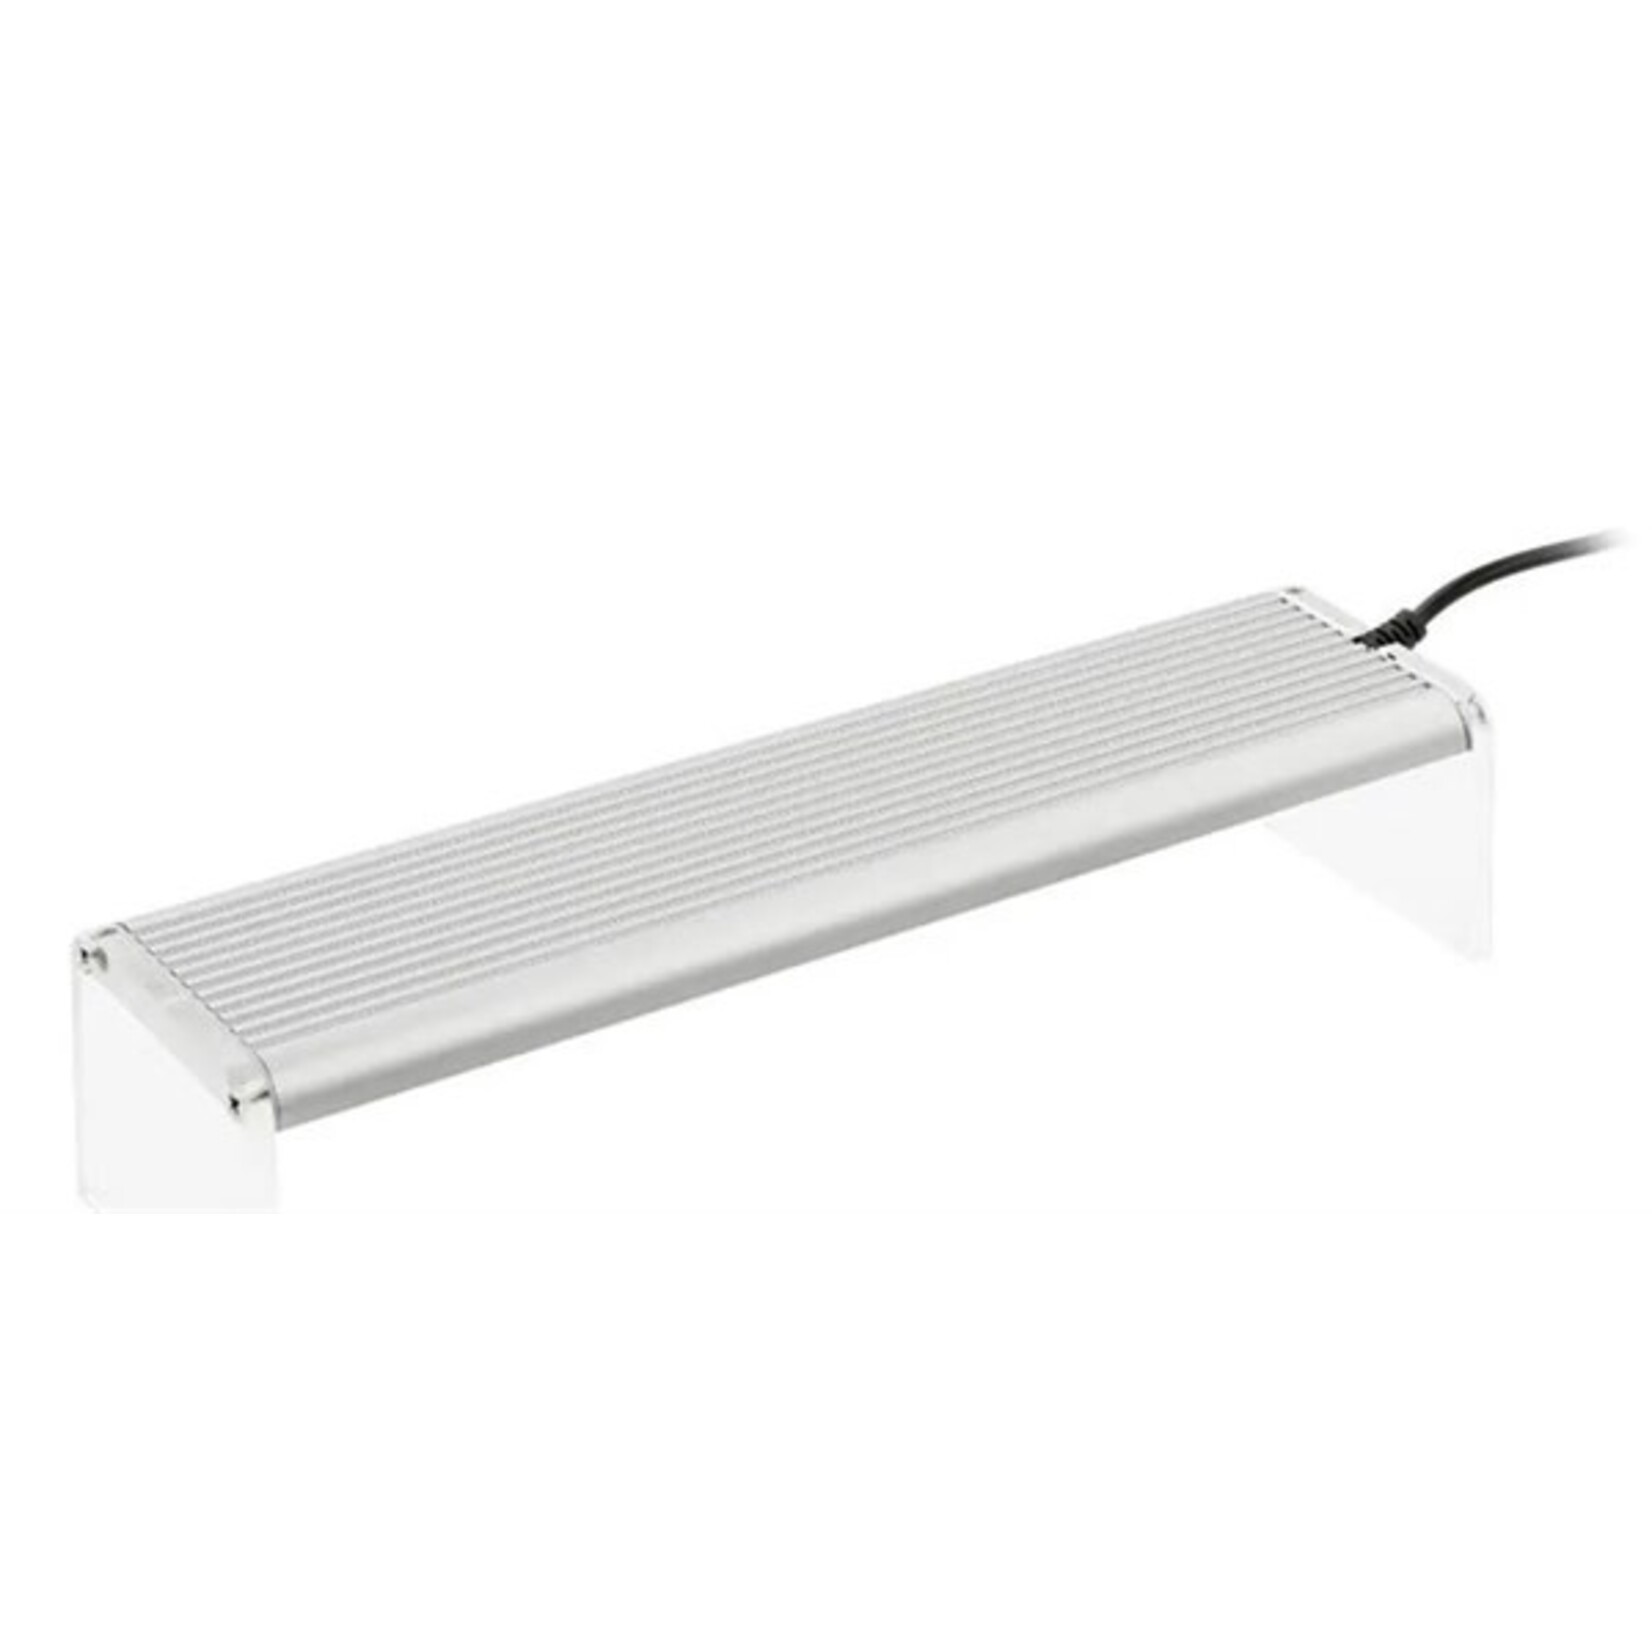 Chihiros A LED A901 90 cm 55w - incl. Duitse trafo